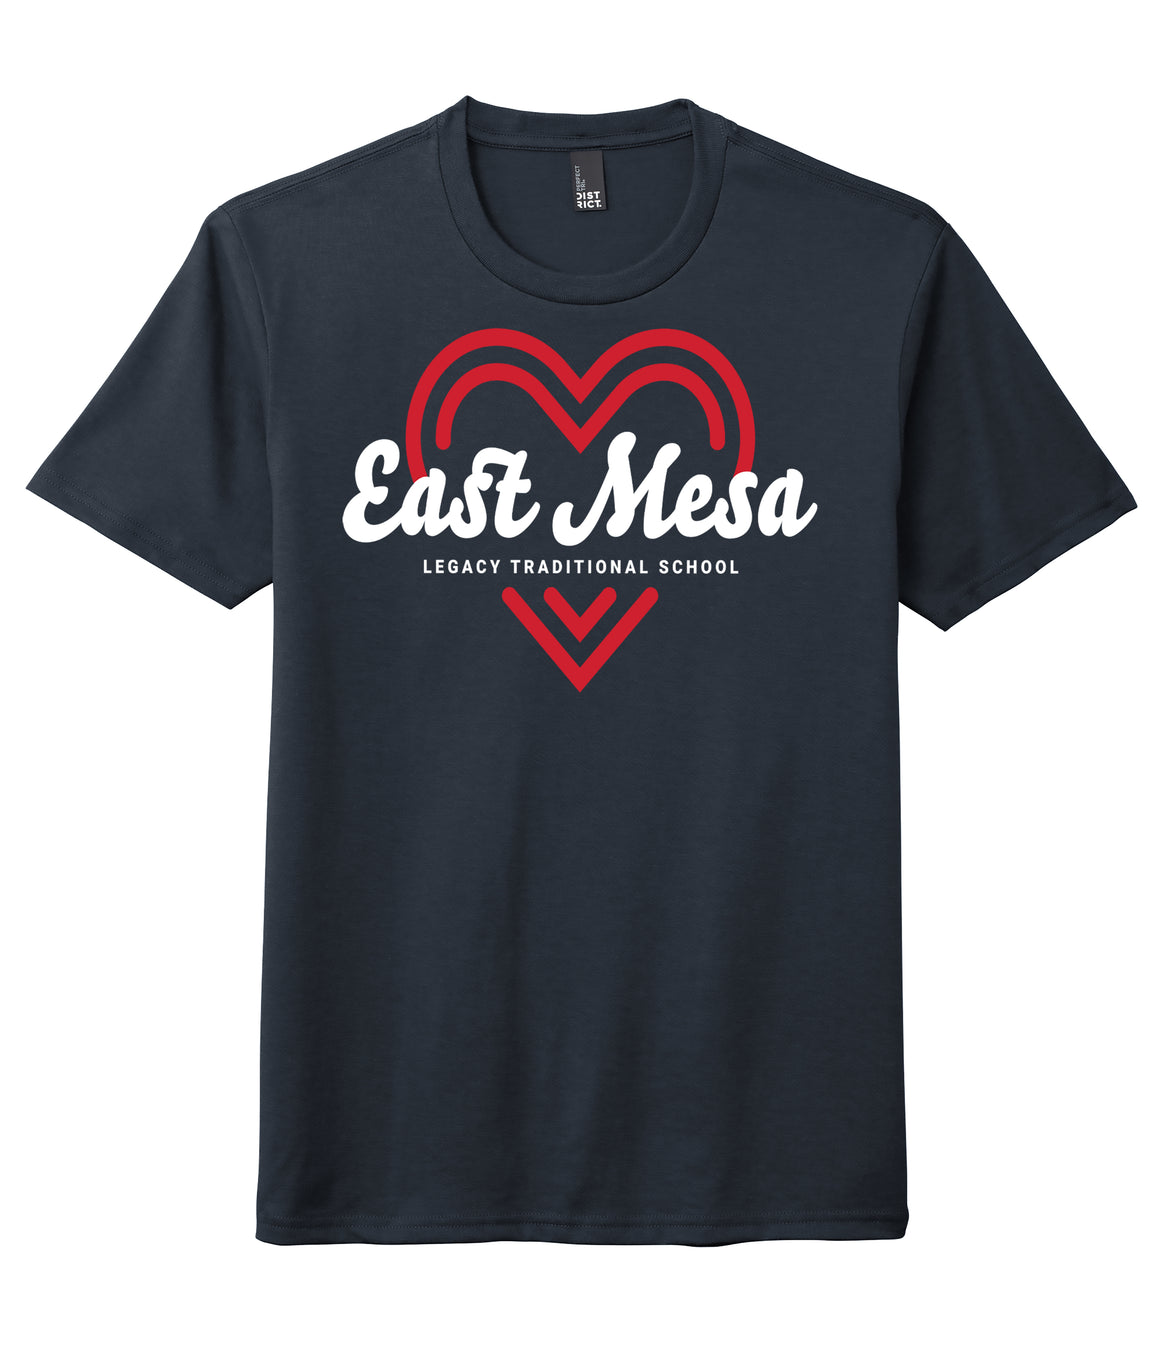 Legacy Traditional School East Mesa - Navy Spirit Wear Shirt With Heart